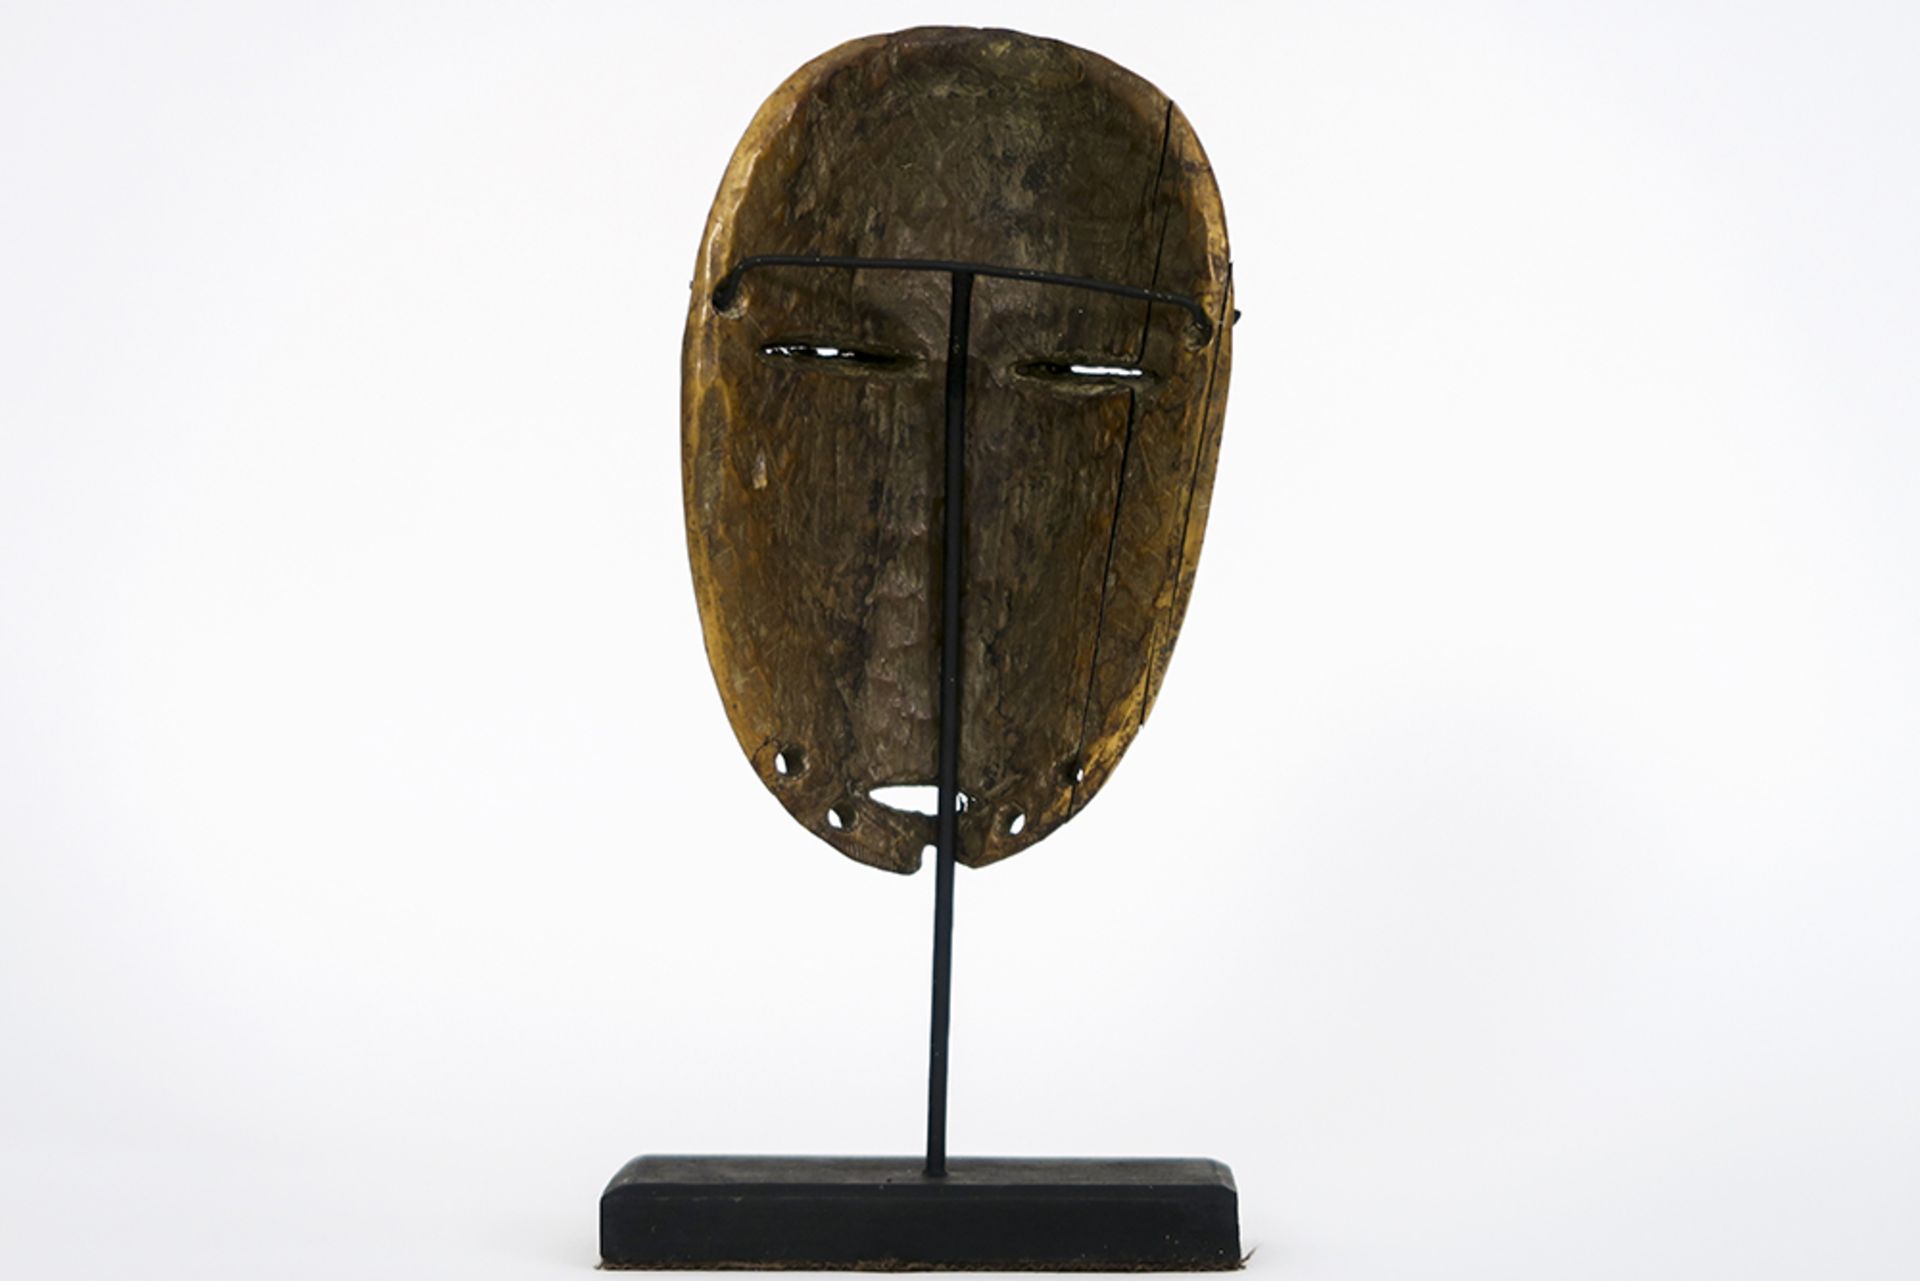 1st half of the 20th Cent. African Congolese "Lega" mask in ivory || AFRIKA - KONGO - 1° HELFT 20° - Bild 3 aus 4